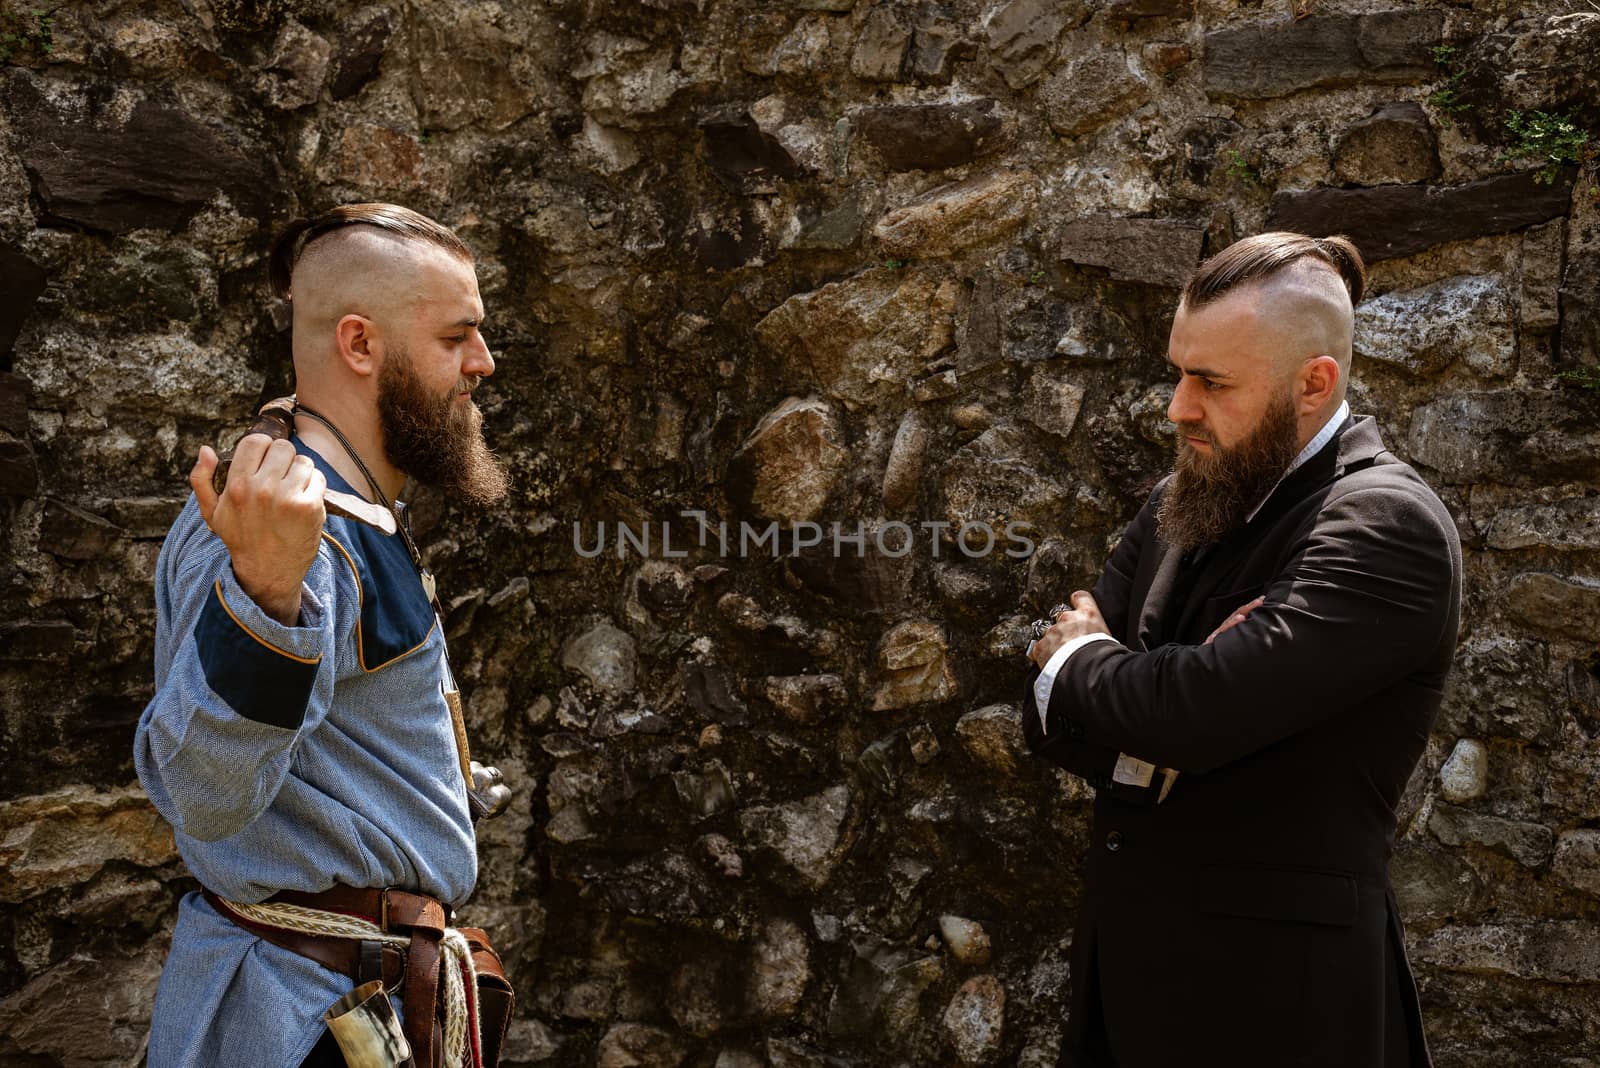 A man in Viking clothes challenges his alter ego who derides him in contemporary clothes, the same man face to face in clothes from different eras